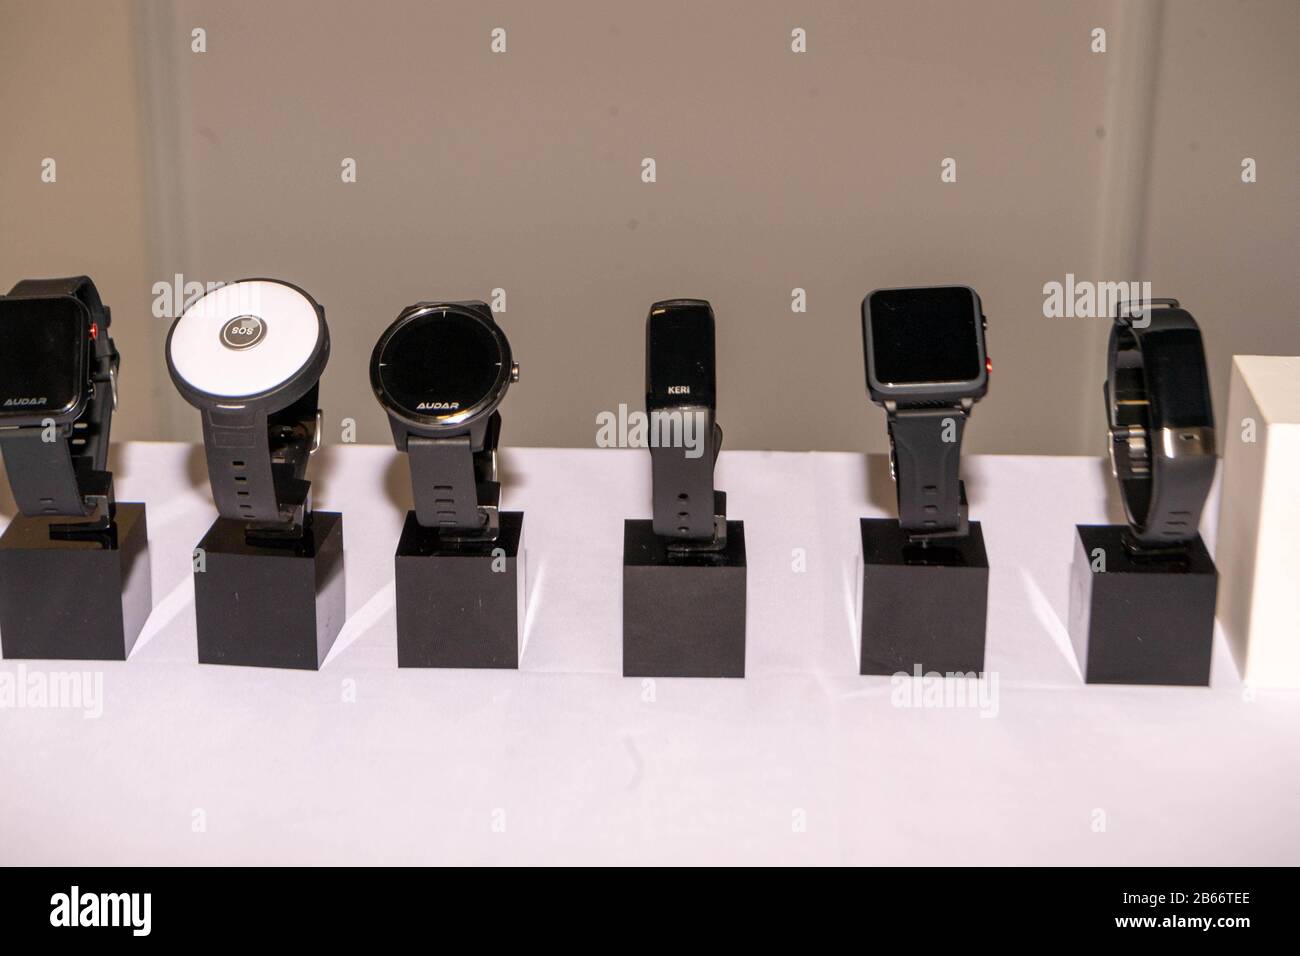 London, UK. 10th Mar, 2020. The Wearable Technology Show 2020 Audar smart watches with a range containing fall monitor and alerts, heart rate monitors and fitness tracker Credit: Ian Davidson/Alamy Live News Stock Photo